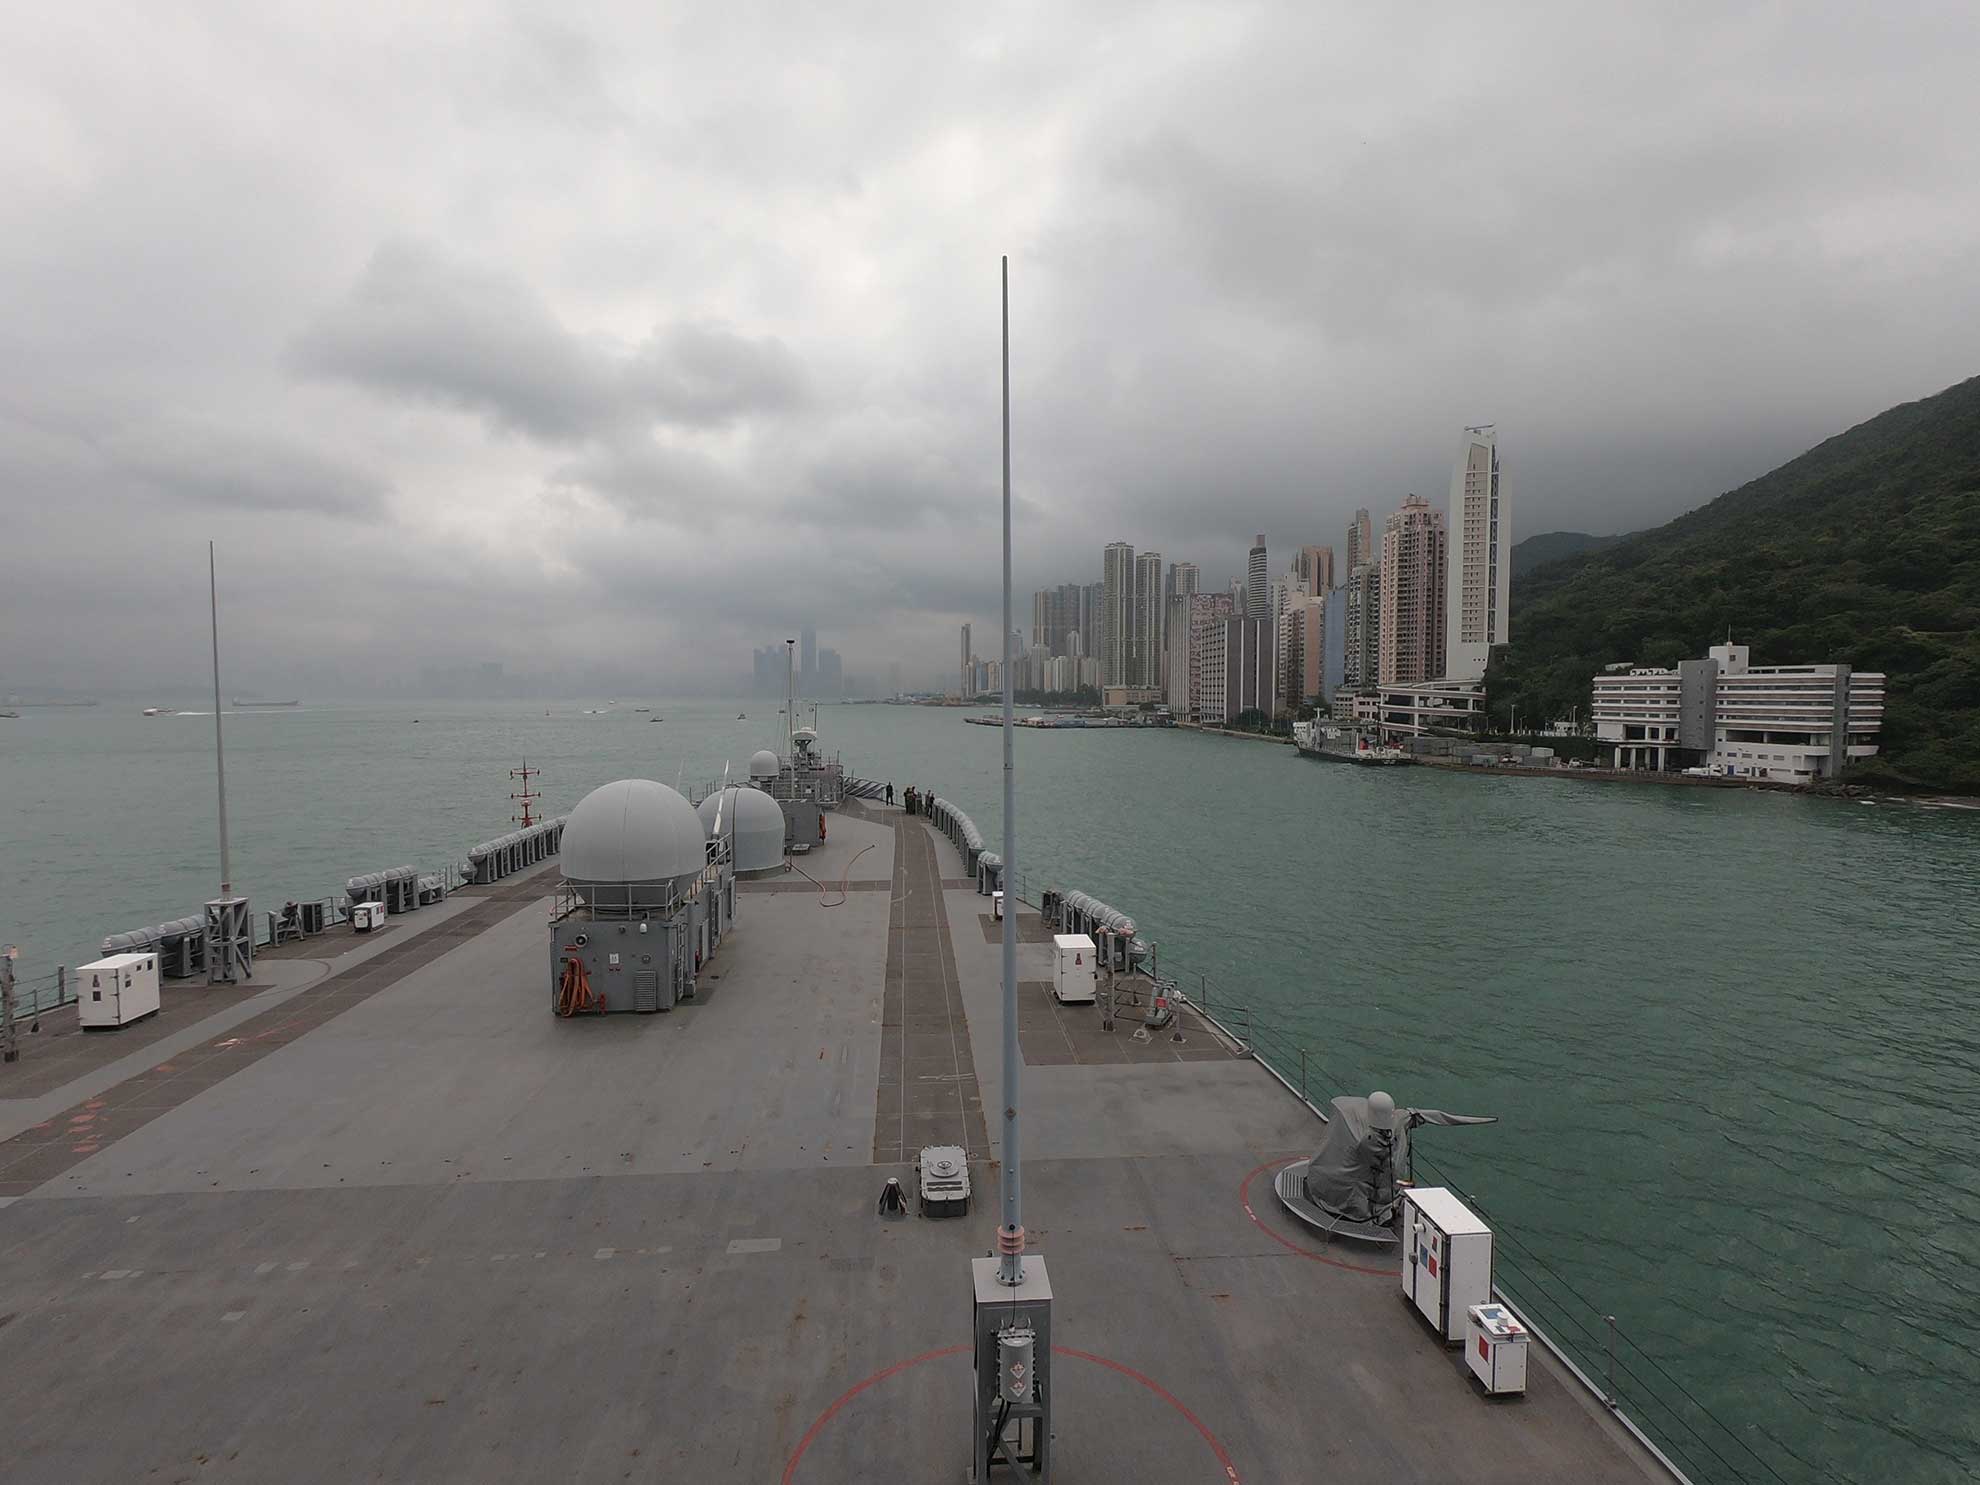 Hong Kong (April 20, 2019) The U.S. 7th Fleet flagship USS Blue Ridge (LCC 19) arrives for a port visit in Hong Kong. Blue Ridge is the oldest operational ship in the Navy and, as U.S. 7th Fleet command ship, is operating in support of security and stability in the Indo-Pacific Region -- U.S. Navy photo by MCS 2nd Class Jim Ong. -